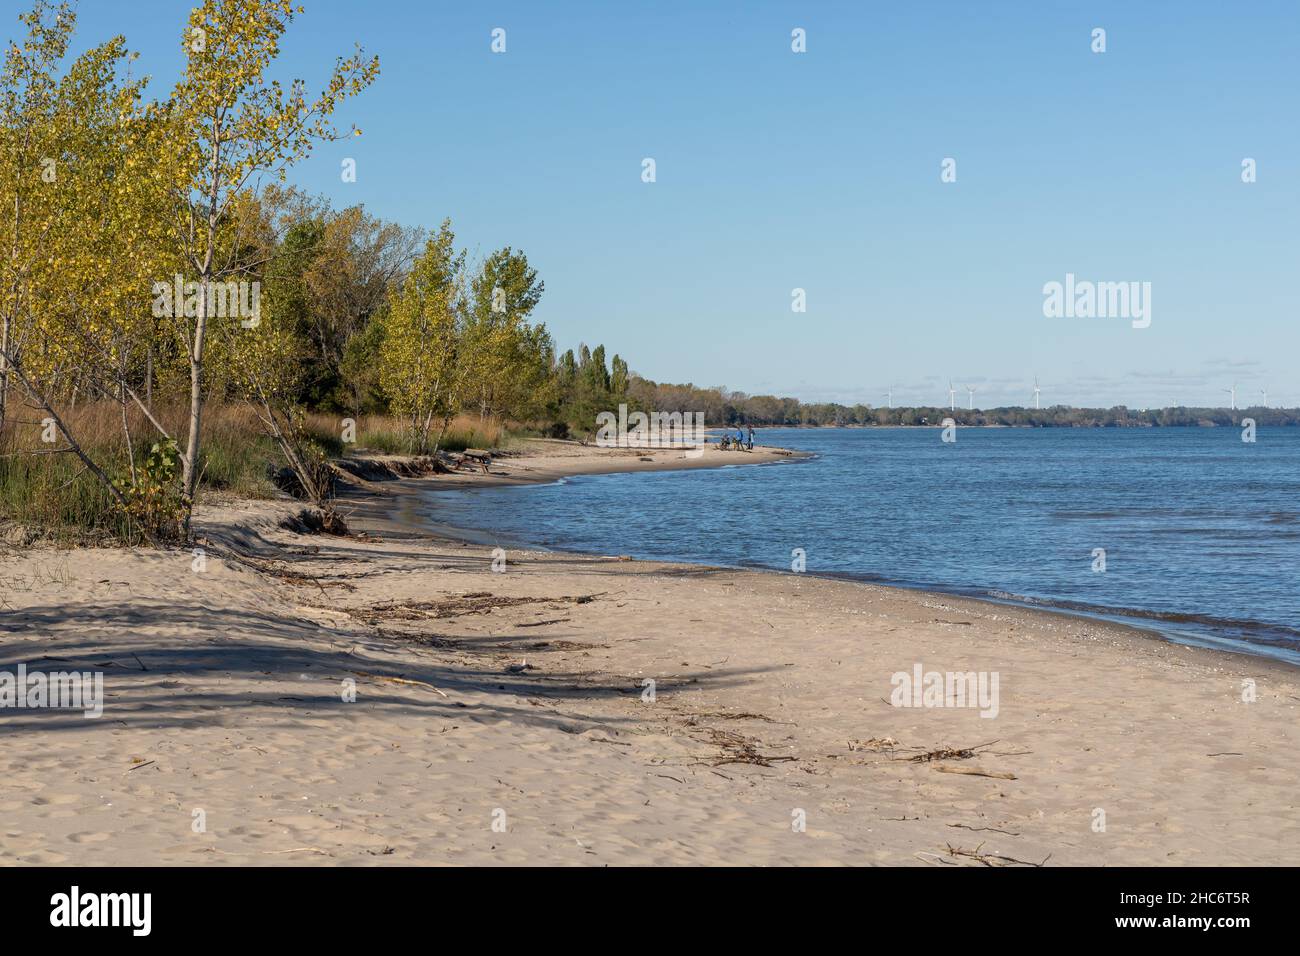 The beach of Rondeau Provincial Park, Ontario, Canada. Lake Erie. Unrecognizable people in distance. Stock Photo